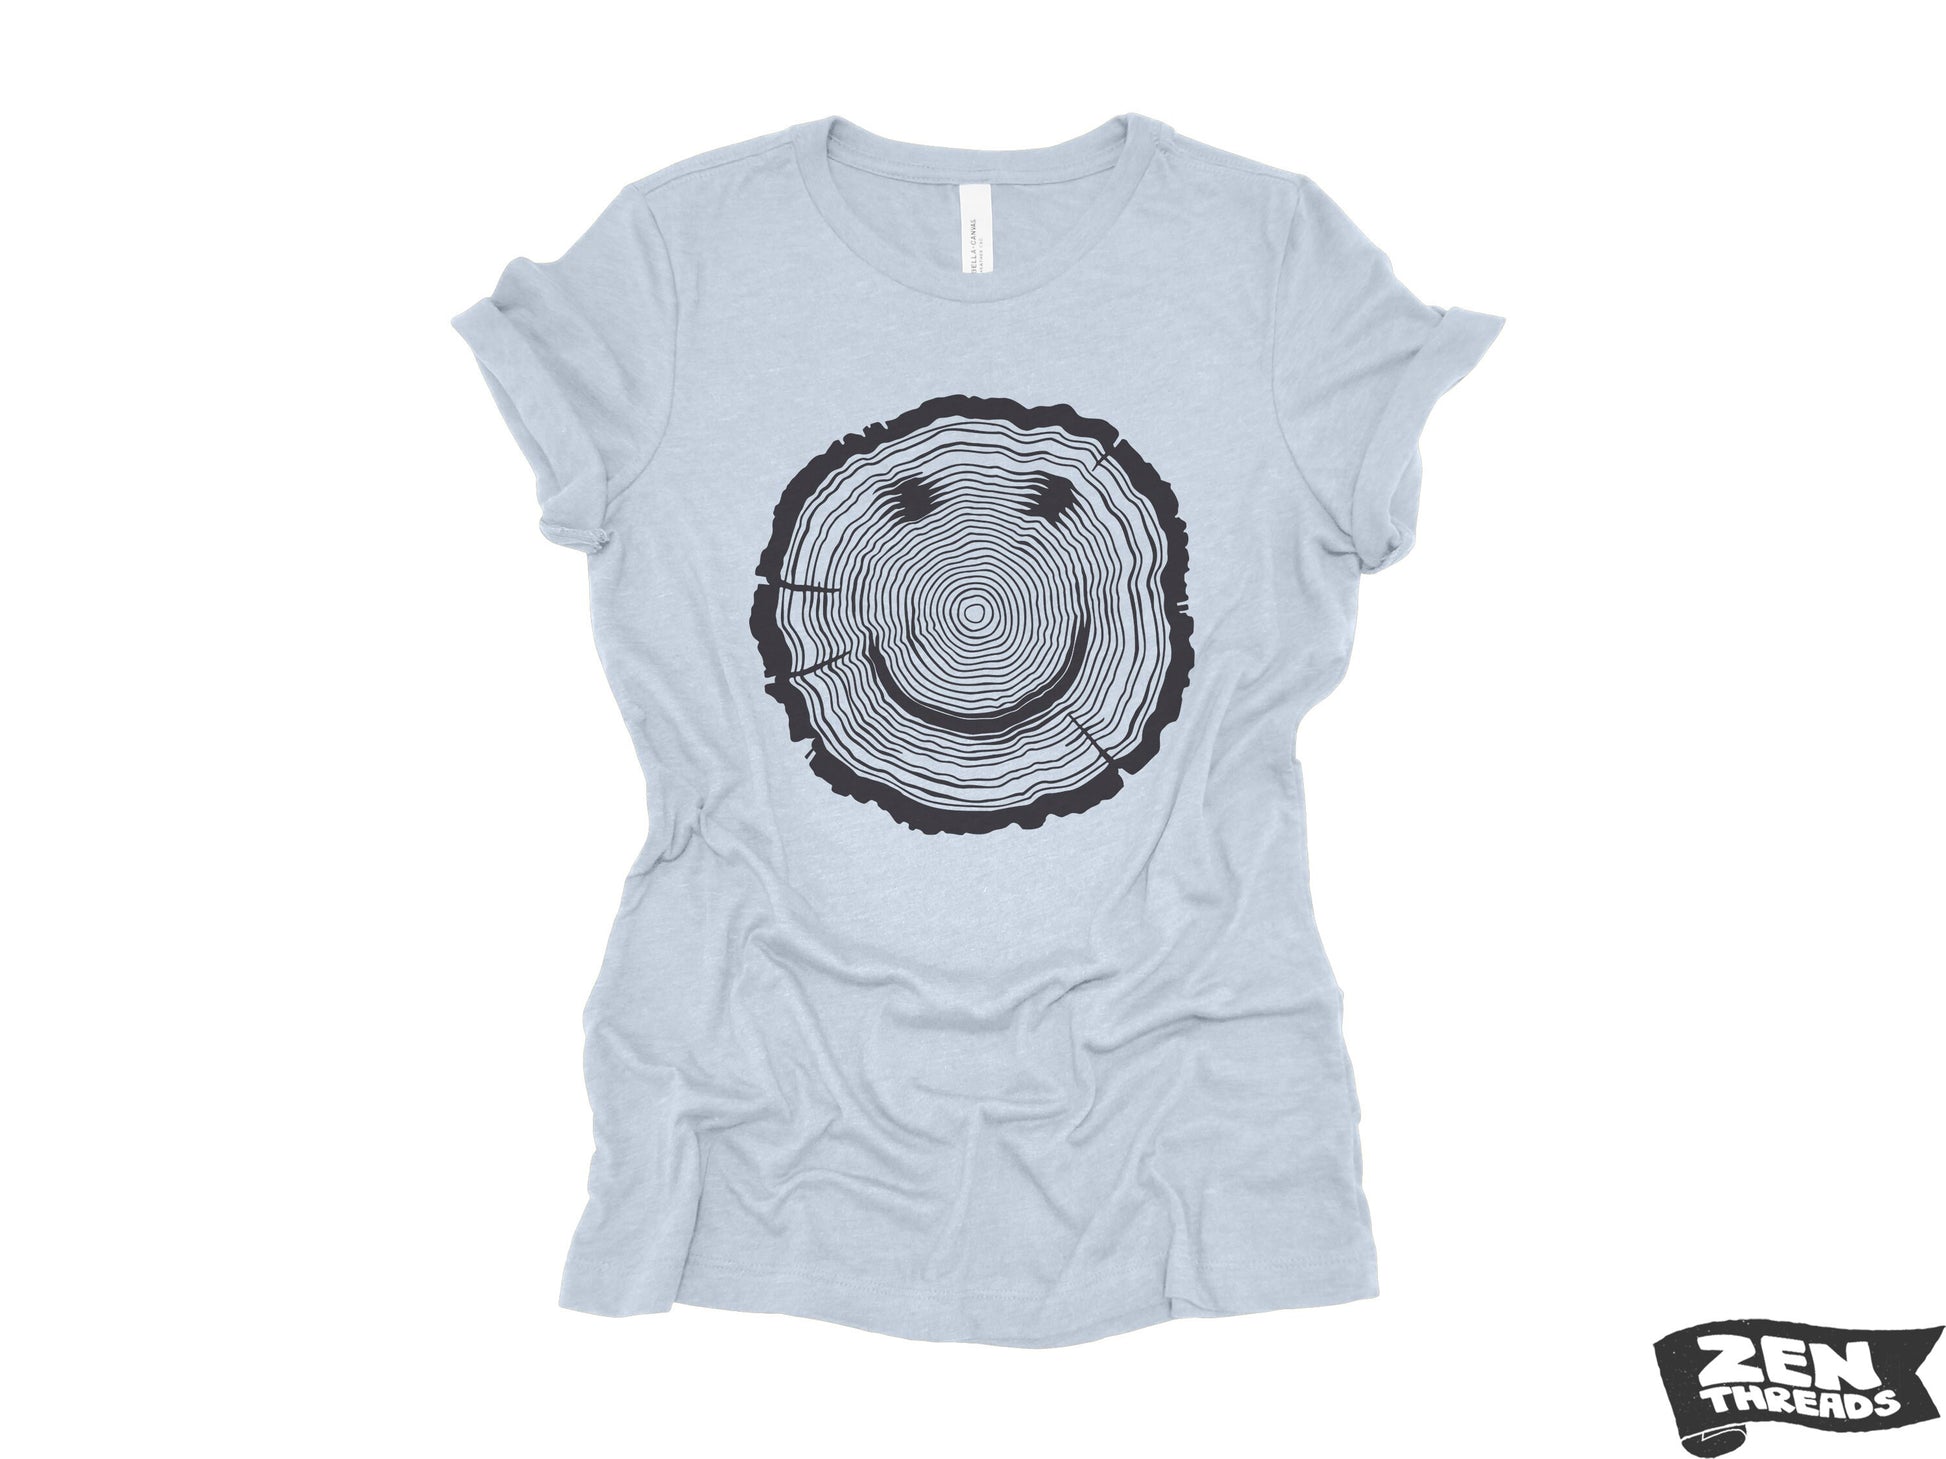 Womens Woodgrain Smiley Face relaxed jersey boyfriend are tee T-shirt Zen Threads + Bella Canvas 6400 eco soft print nature lover